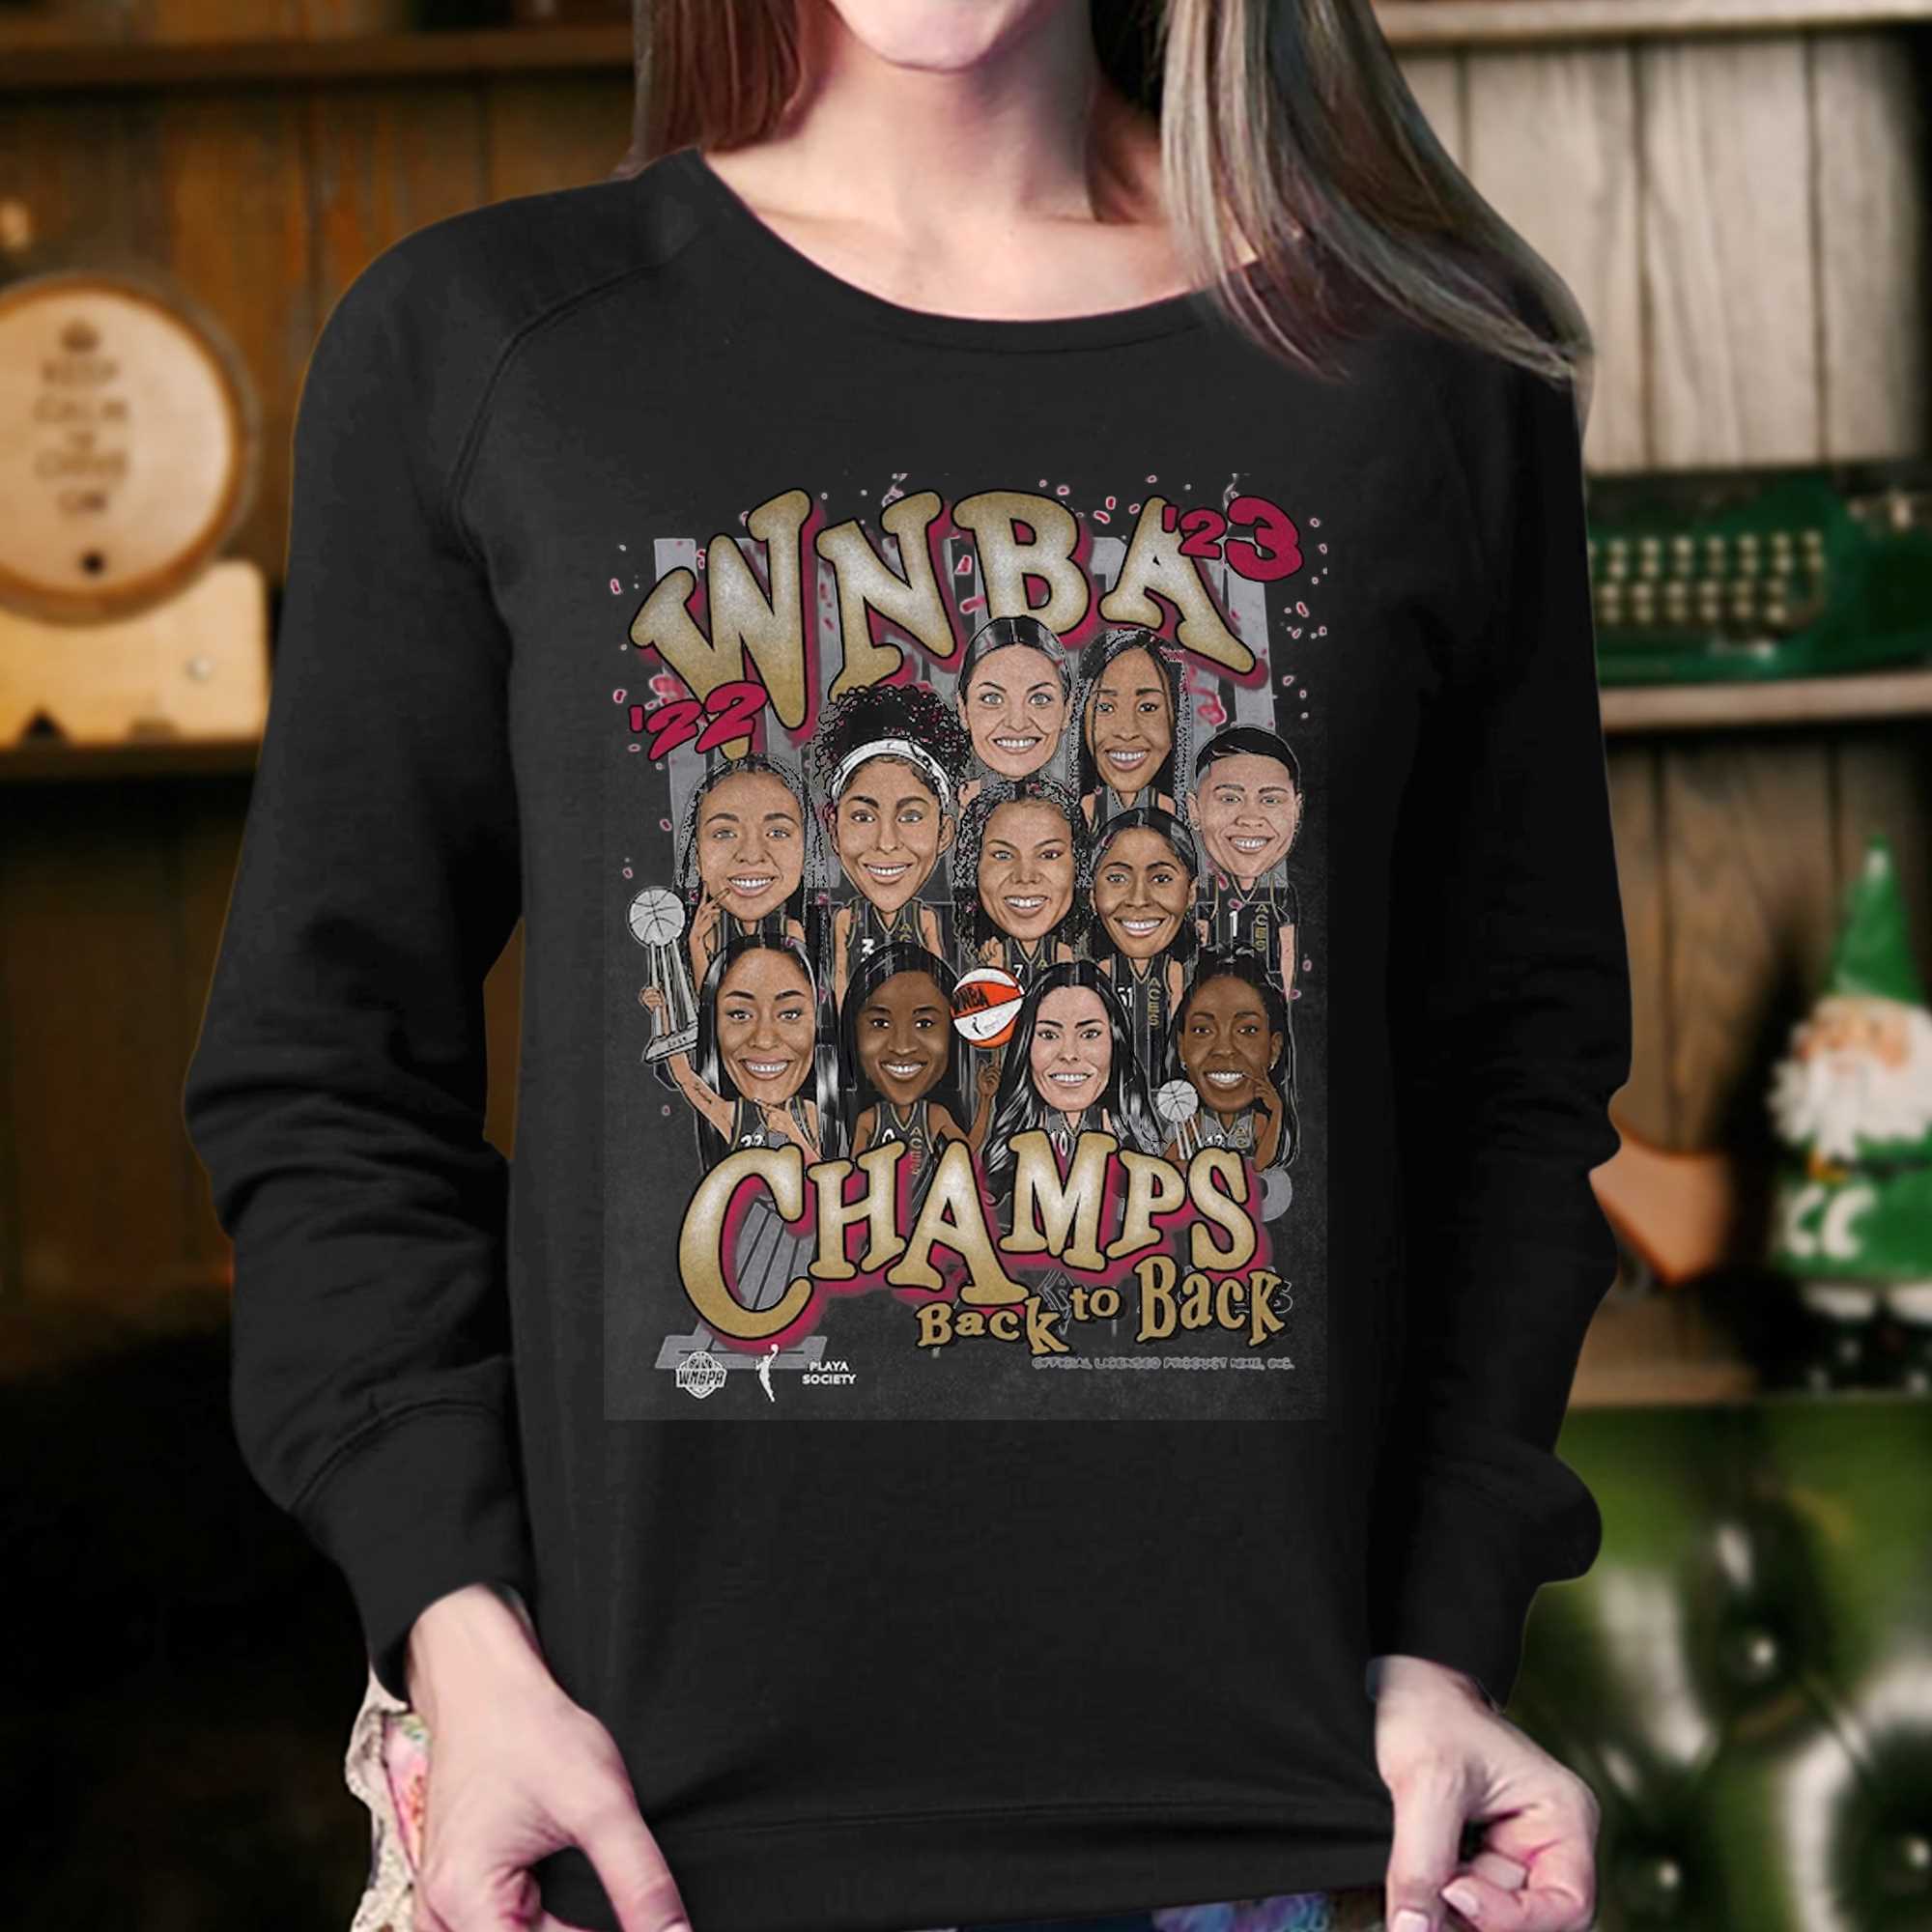 Las Vegas Aces back 2 back WNBA Champions poster shirt, hoodie, sweater,  longsleeve and V-neck T-shirt